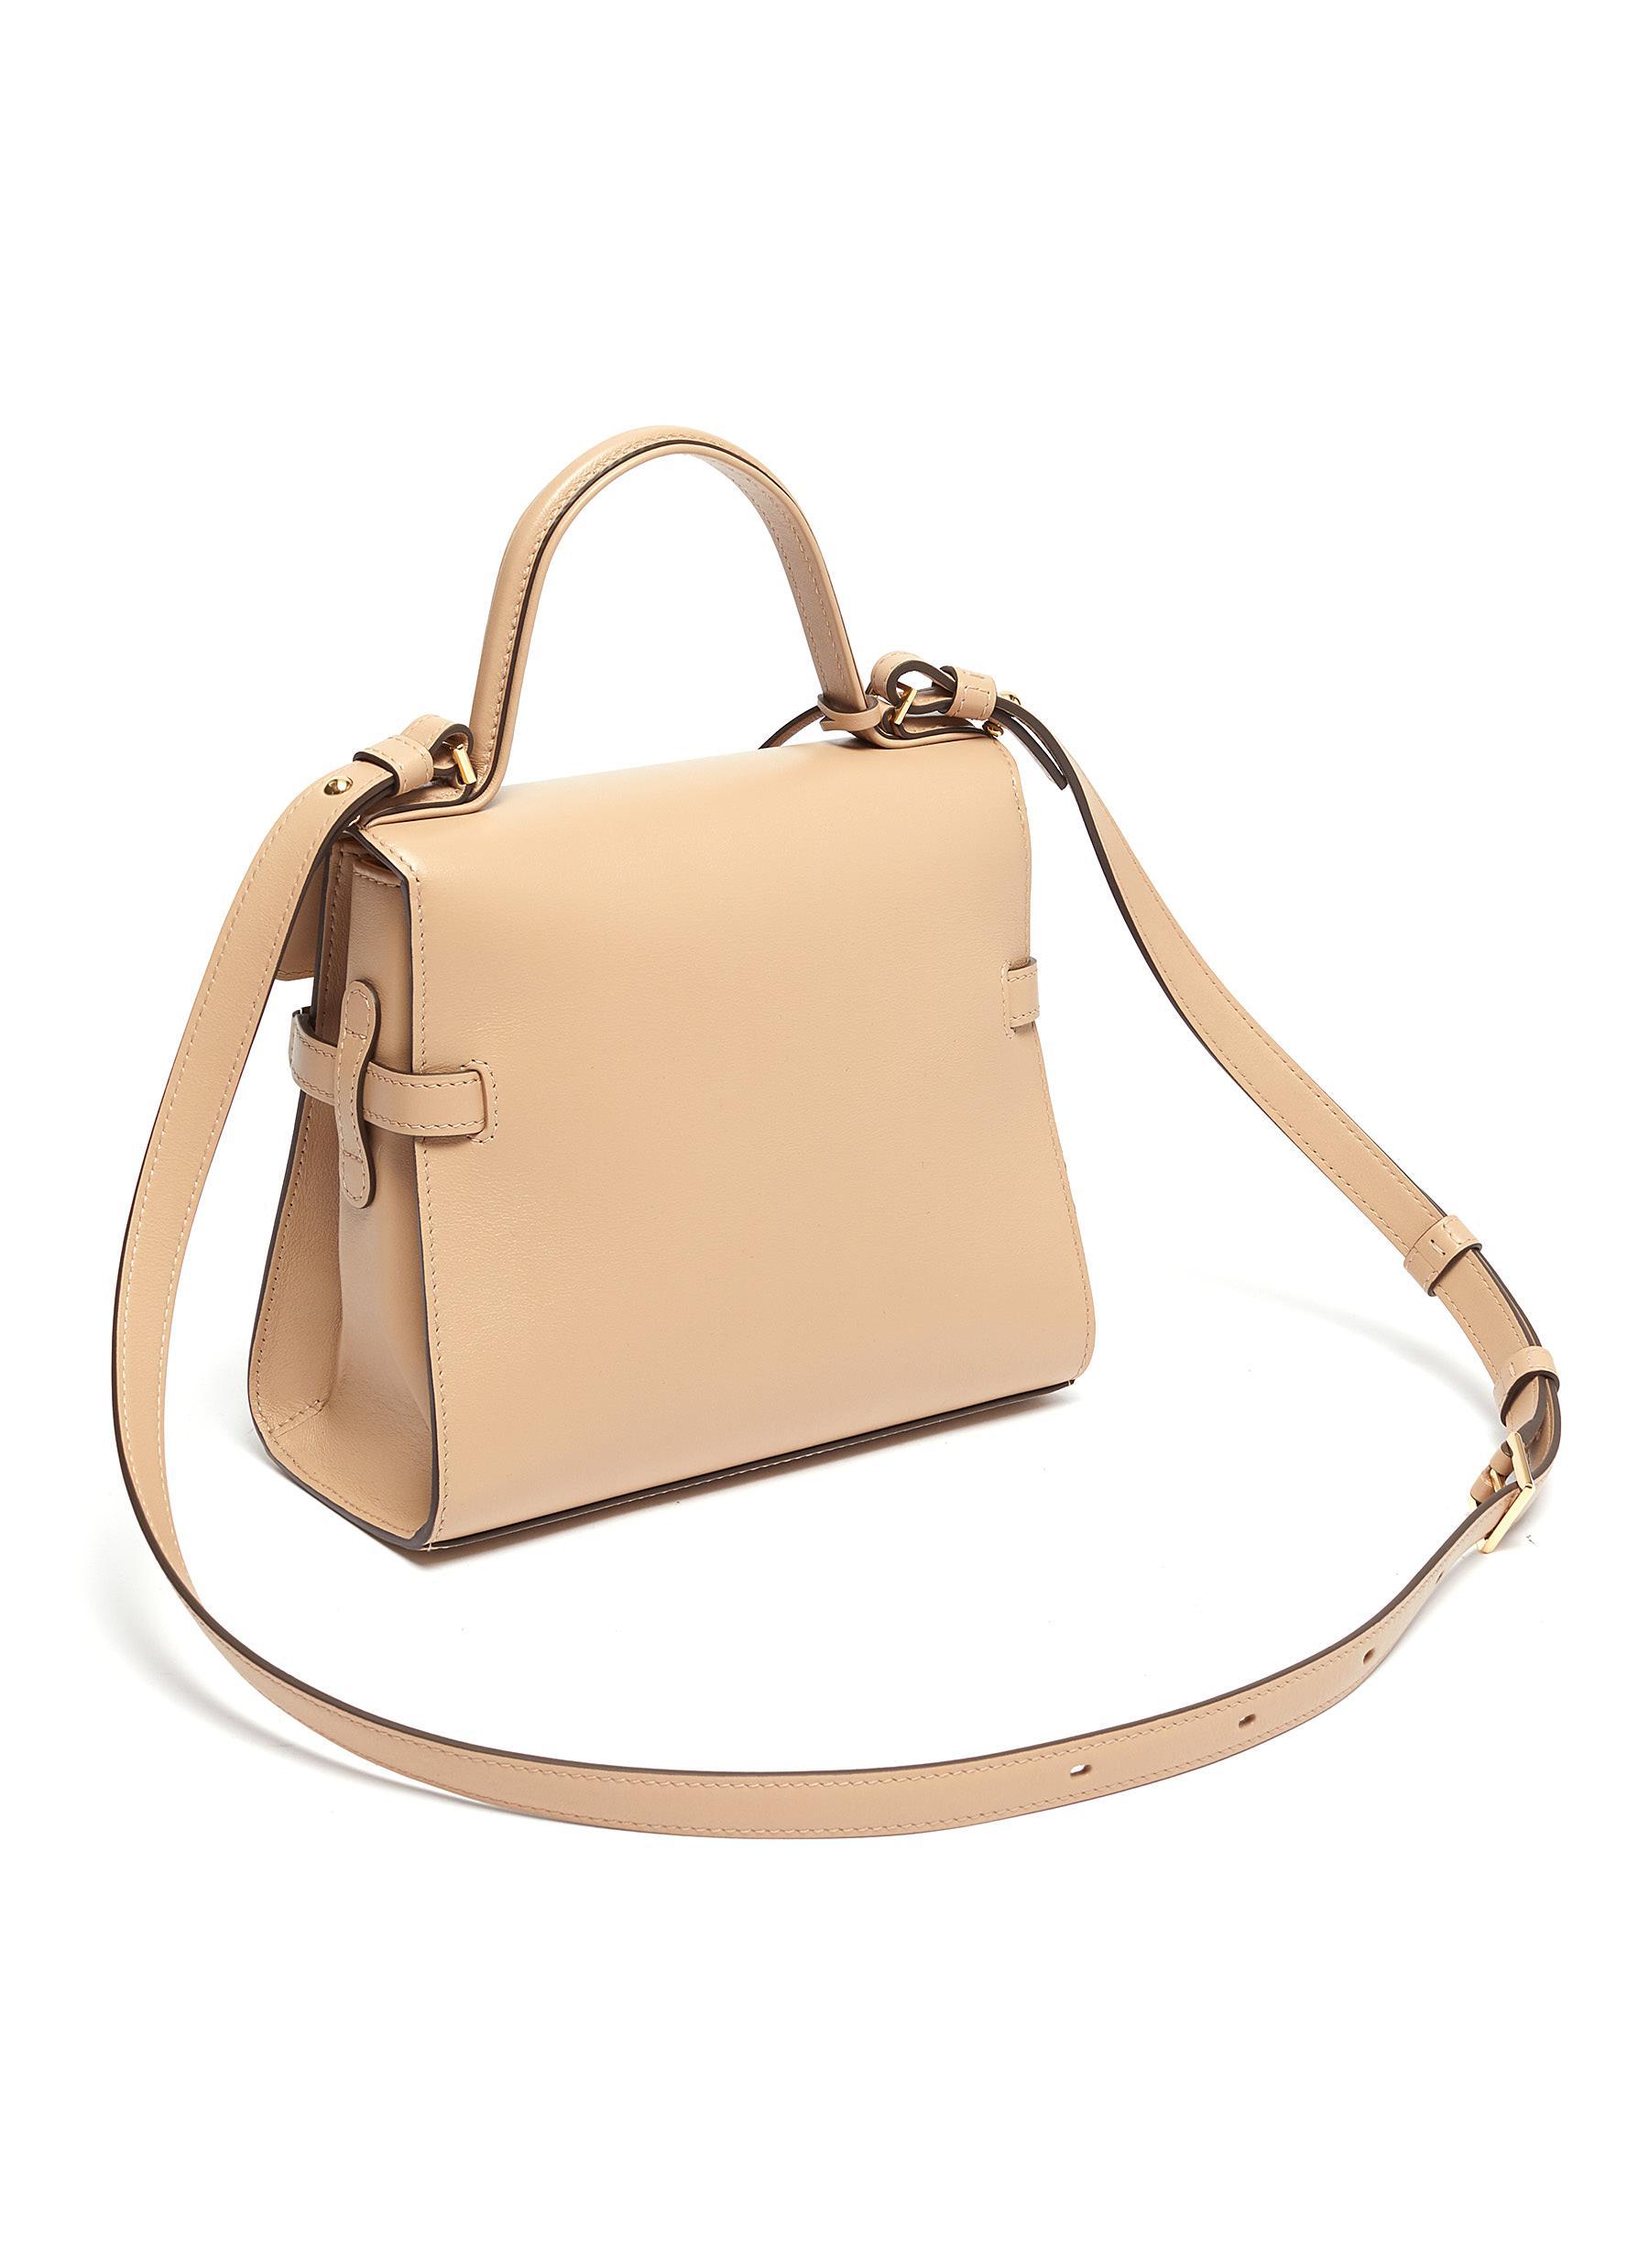 Delvaux Leather Tempête Pm' Top Handle Bag in Natural - Lyst